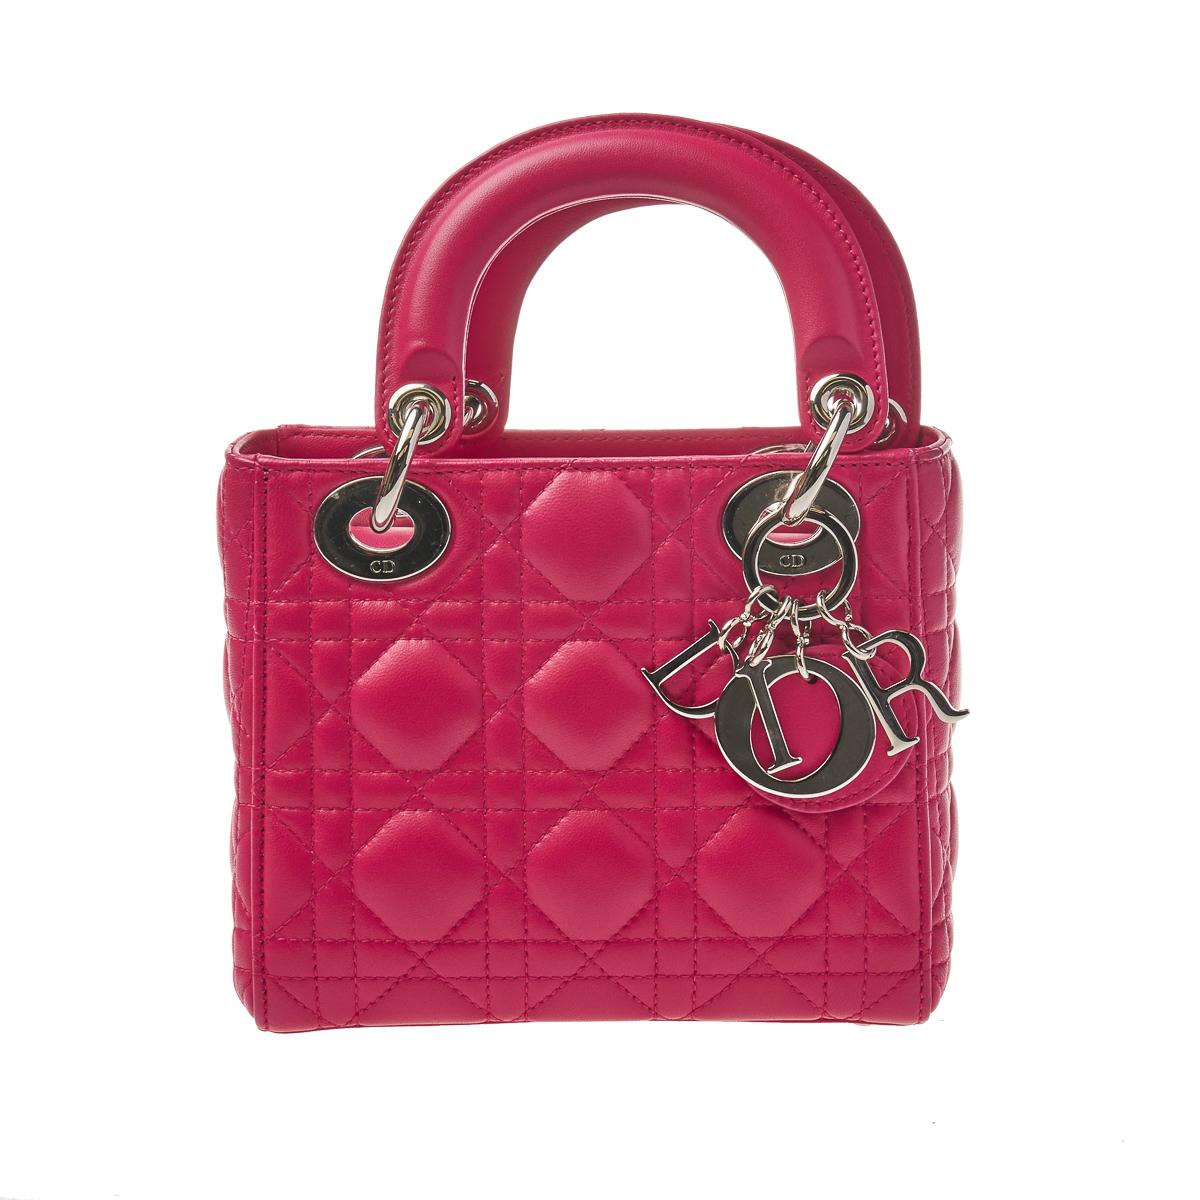 Mini Lady Dior Bag In Baby Pearly Pink with Champaign Hardware  Bag  Religion